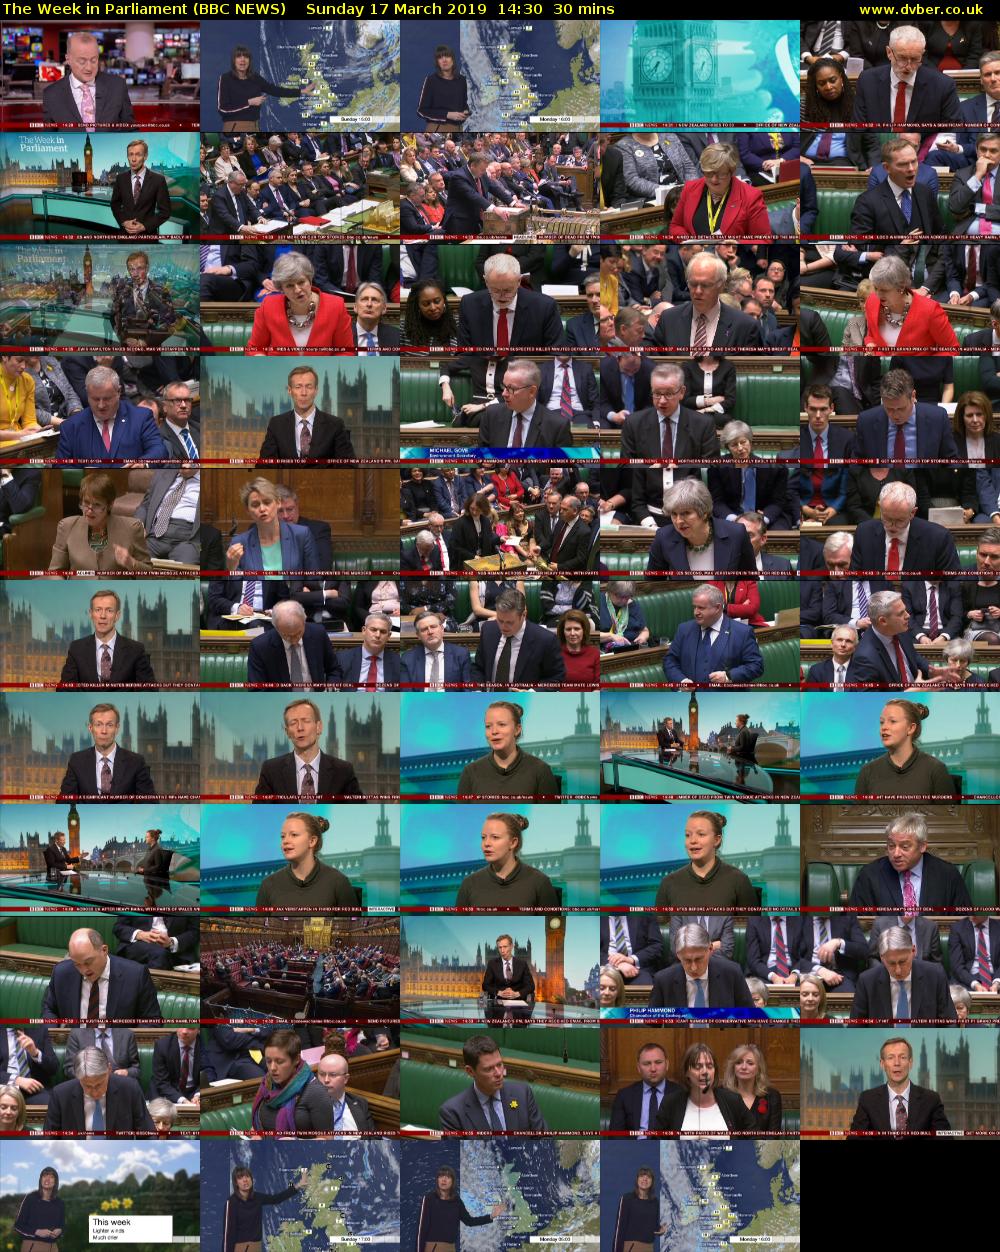 The Week in Parliament (BBC NEWS) Sunday 17 March 2019 14:30 - 15:00